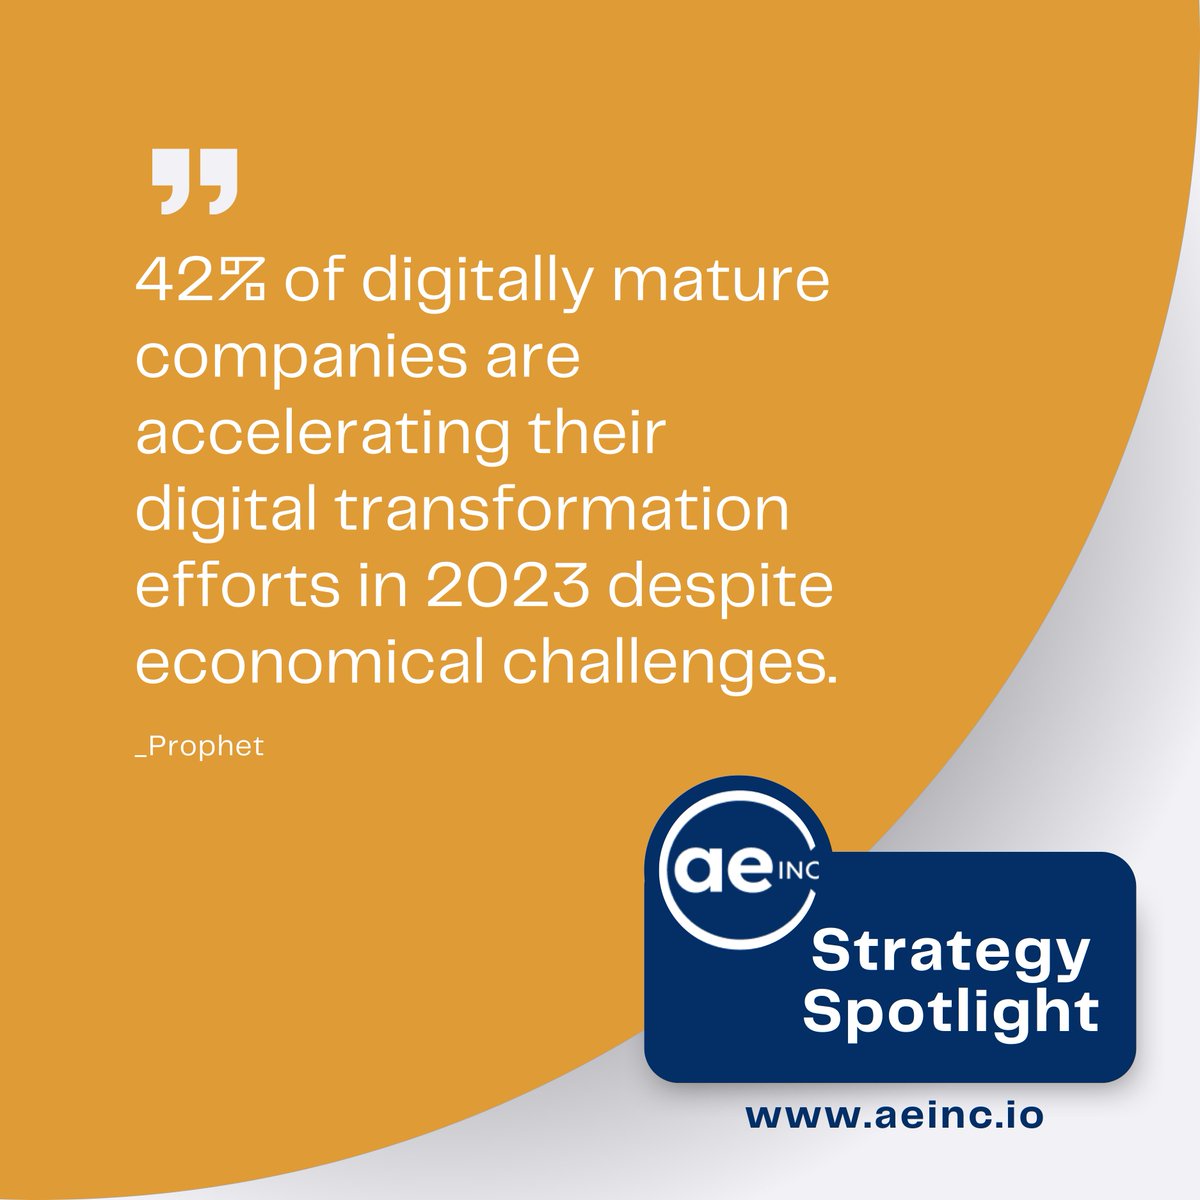 Digitalization is no longer an aspiration, it's a necessity. ⌛
🔍Explore how we can enable your digital transformation journey today at aeinc.io
#AeInc #StrategicSpotlight #DigitalTransformations #EnablingSustainableGrowth